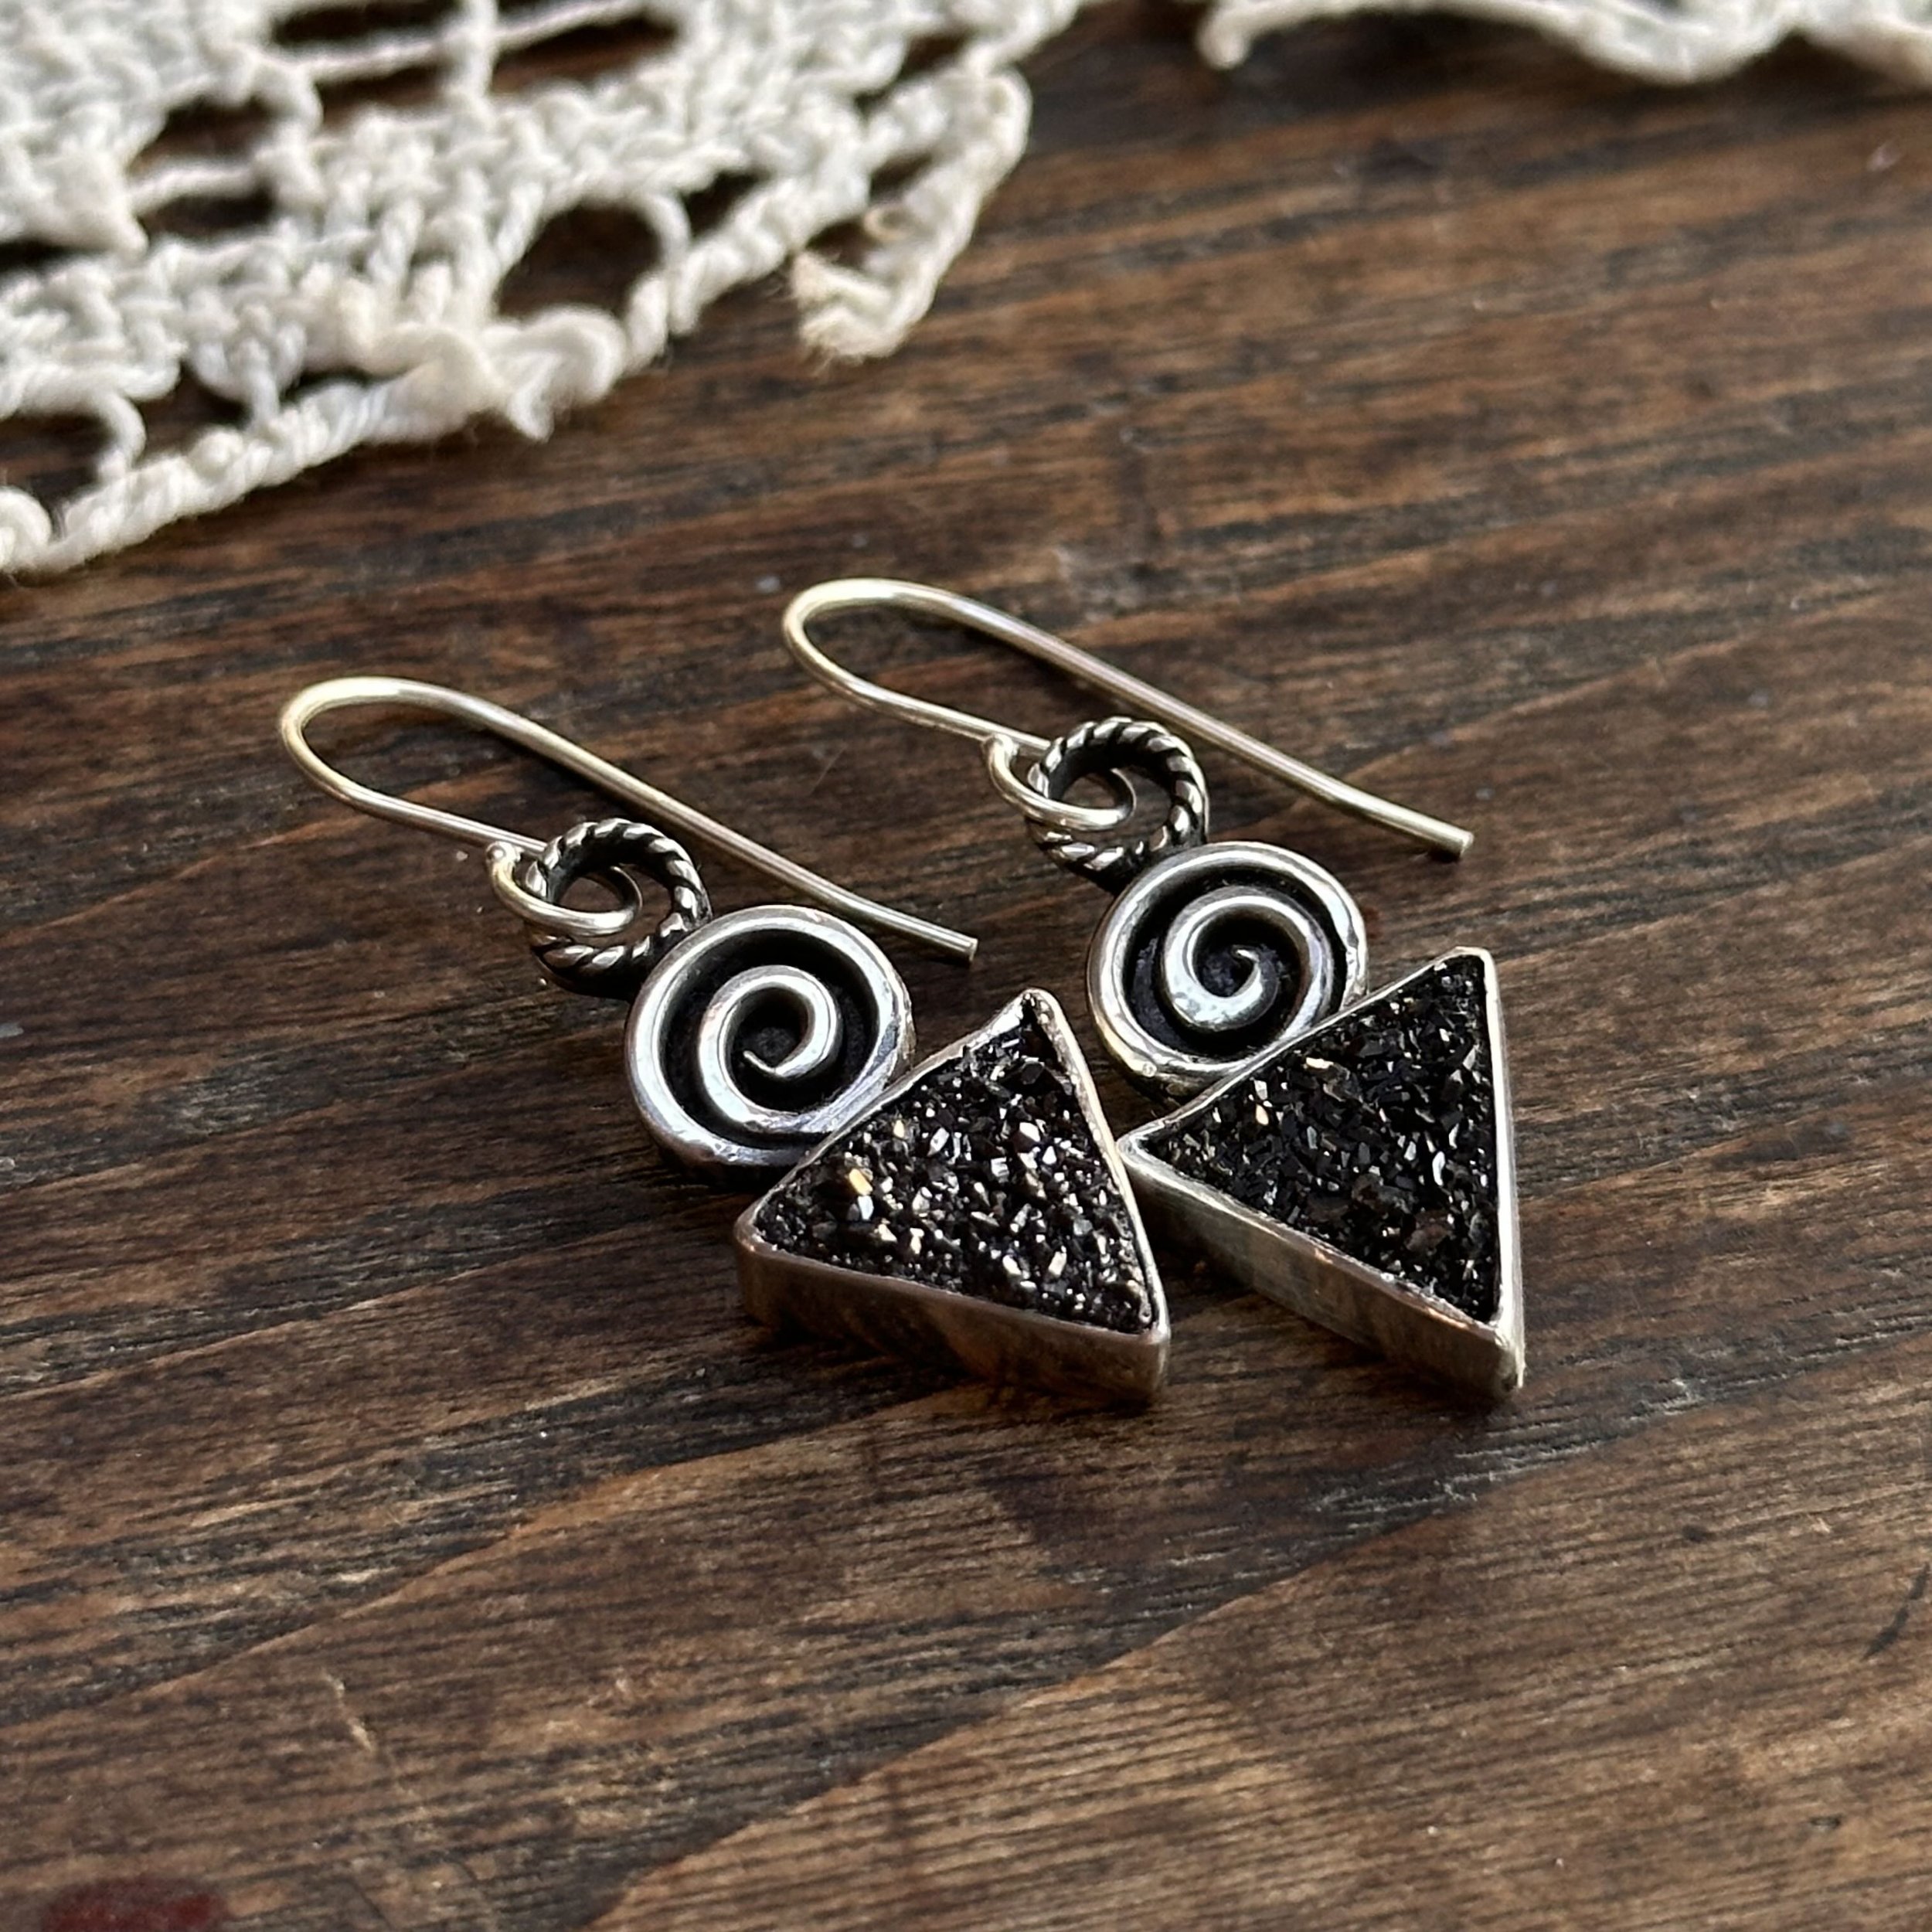 Black Druzy Earrings with Spirals - Dangle Earrings - Handmade in New  Hampshire, USA — Wendy Wetherbee - Nature Focused Artist & Metalsmith